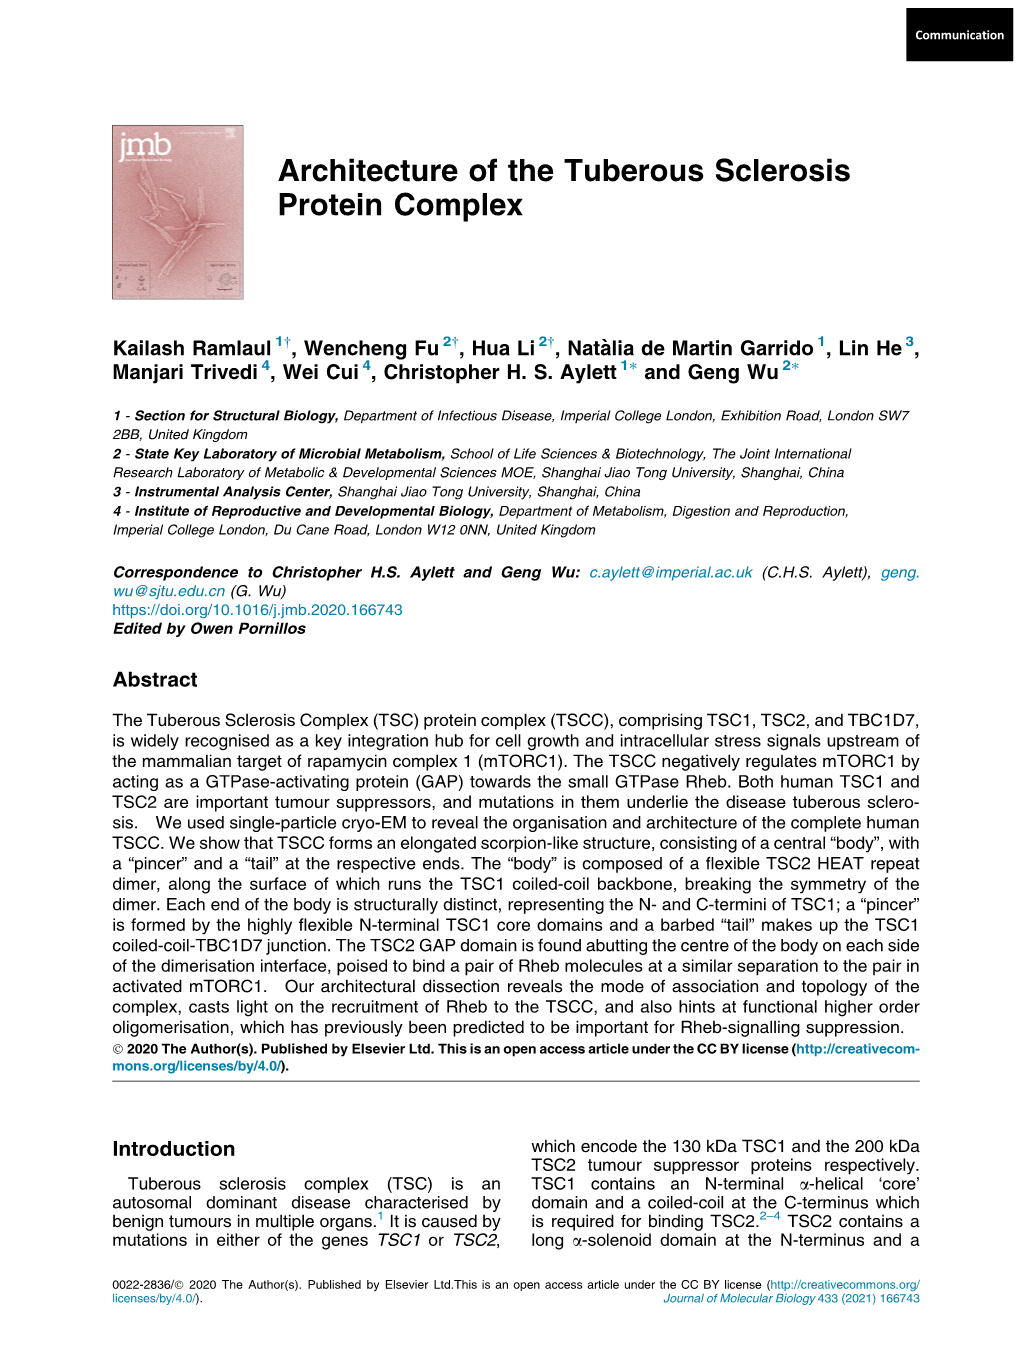 Architecture of the Tuberous Sclerosis Protein Complex